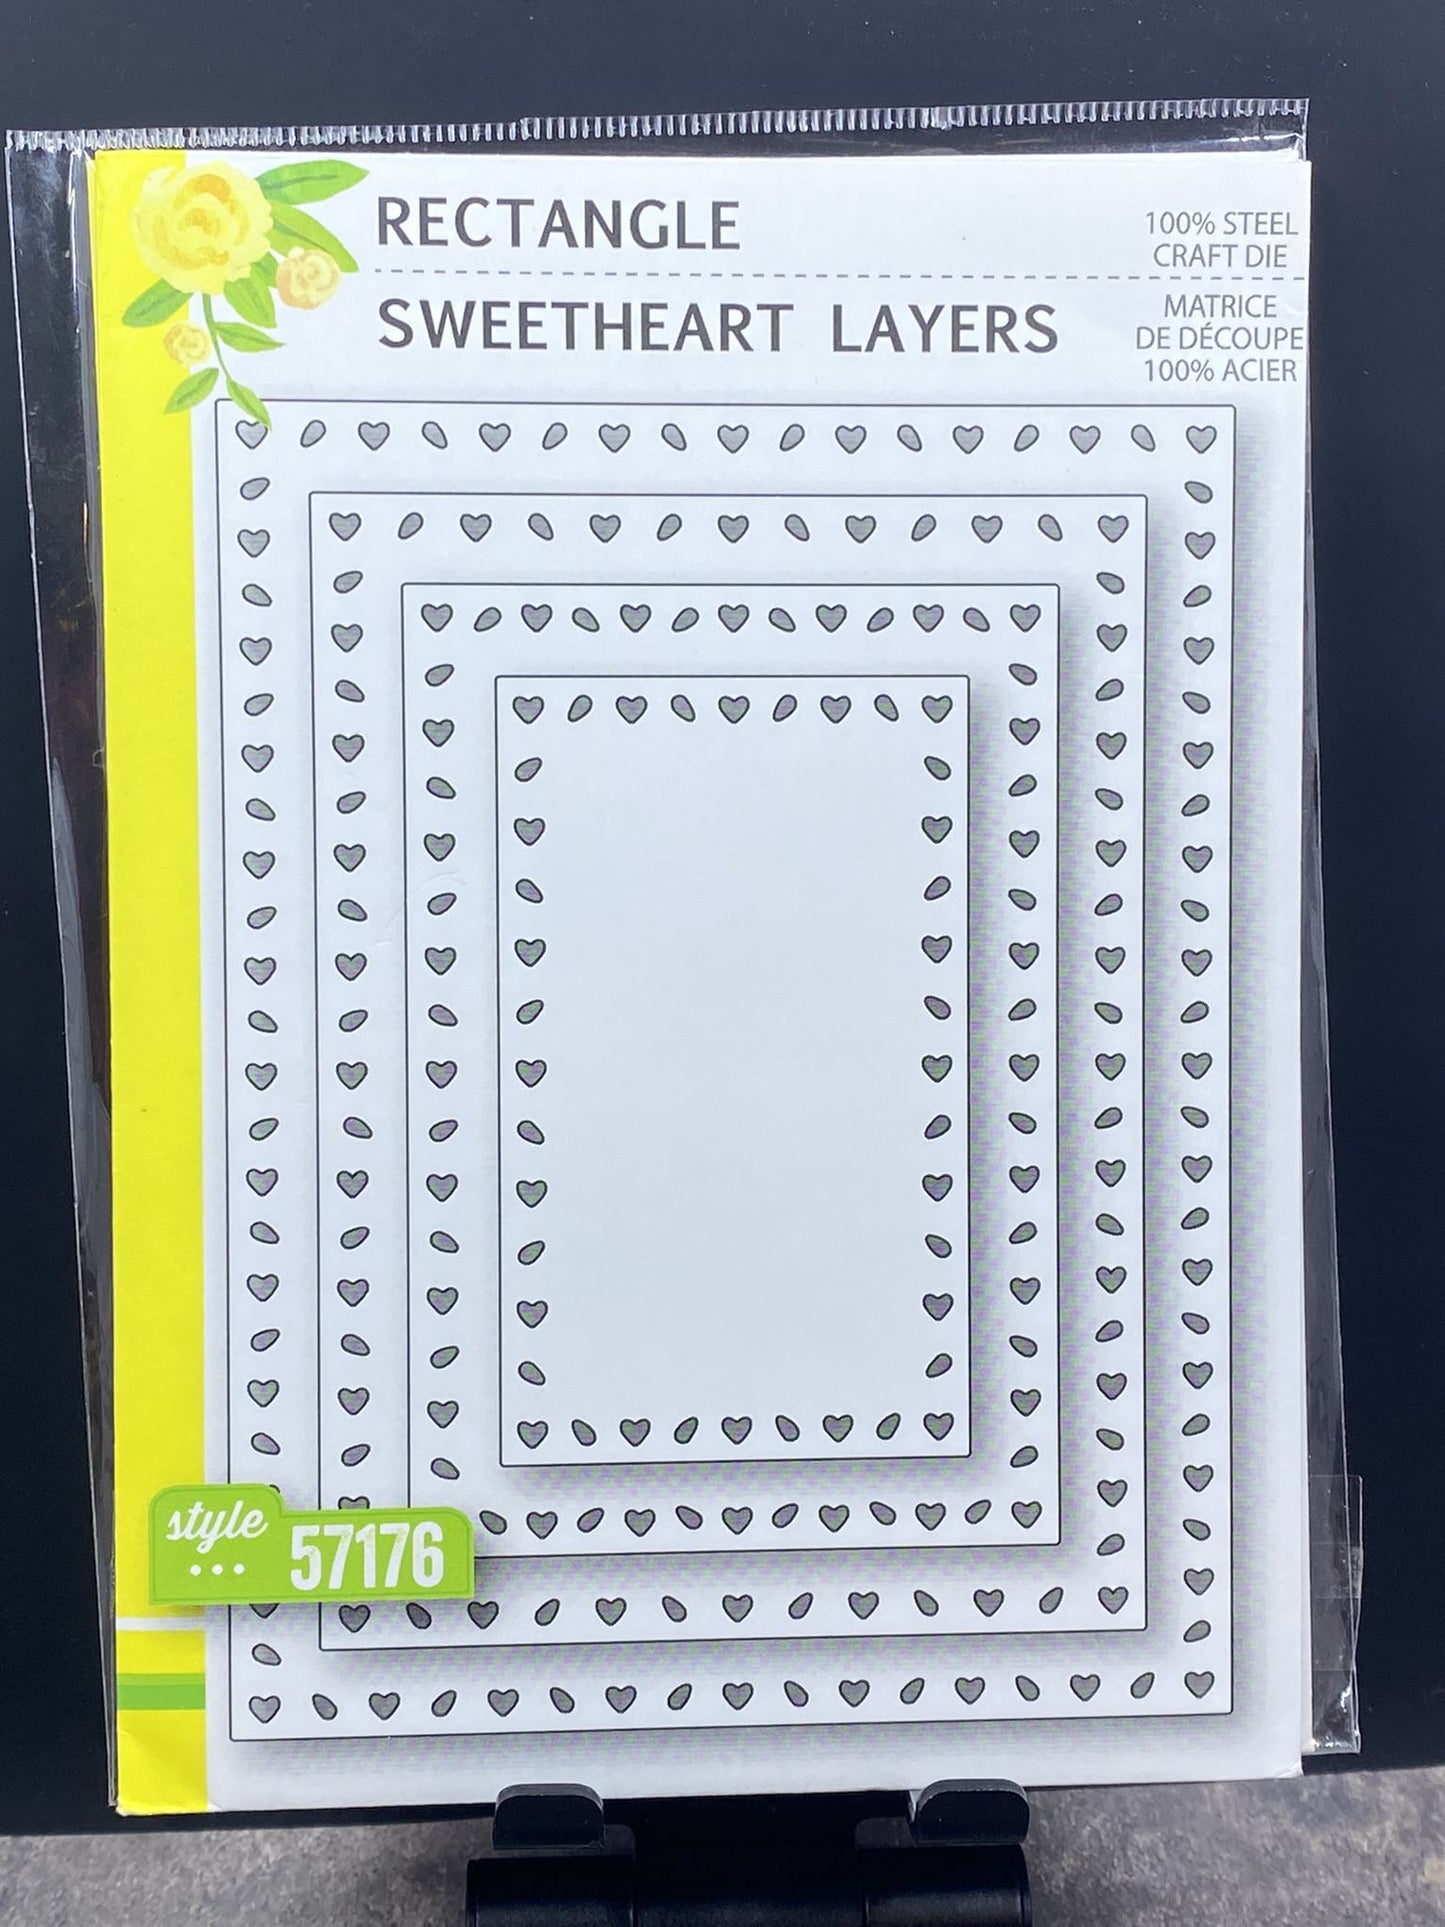 Birch Press Designs - Rectangle Sweetheart Layers included 4 Nesting Dies